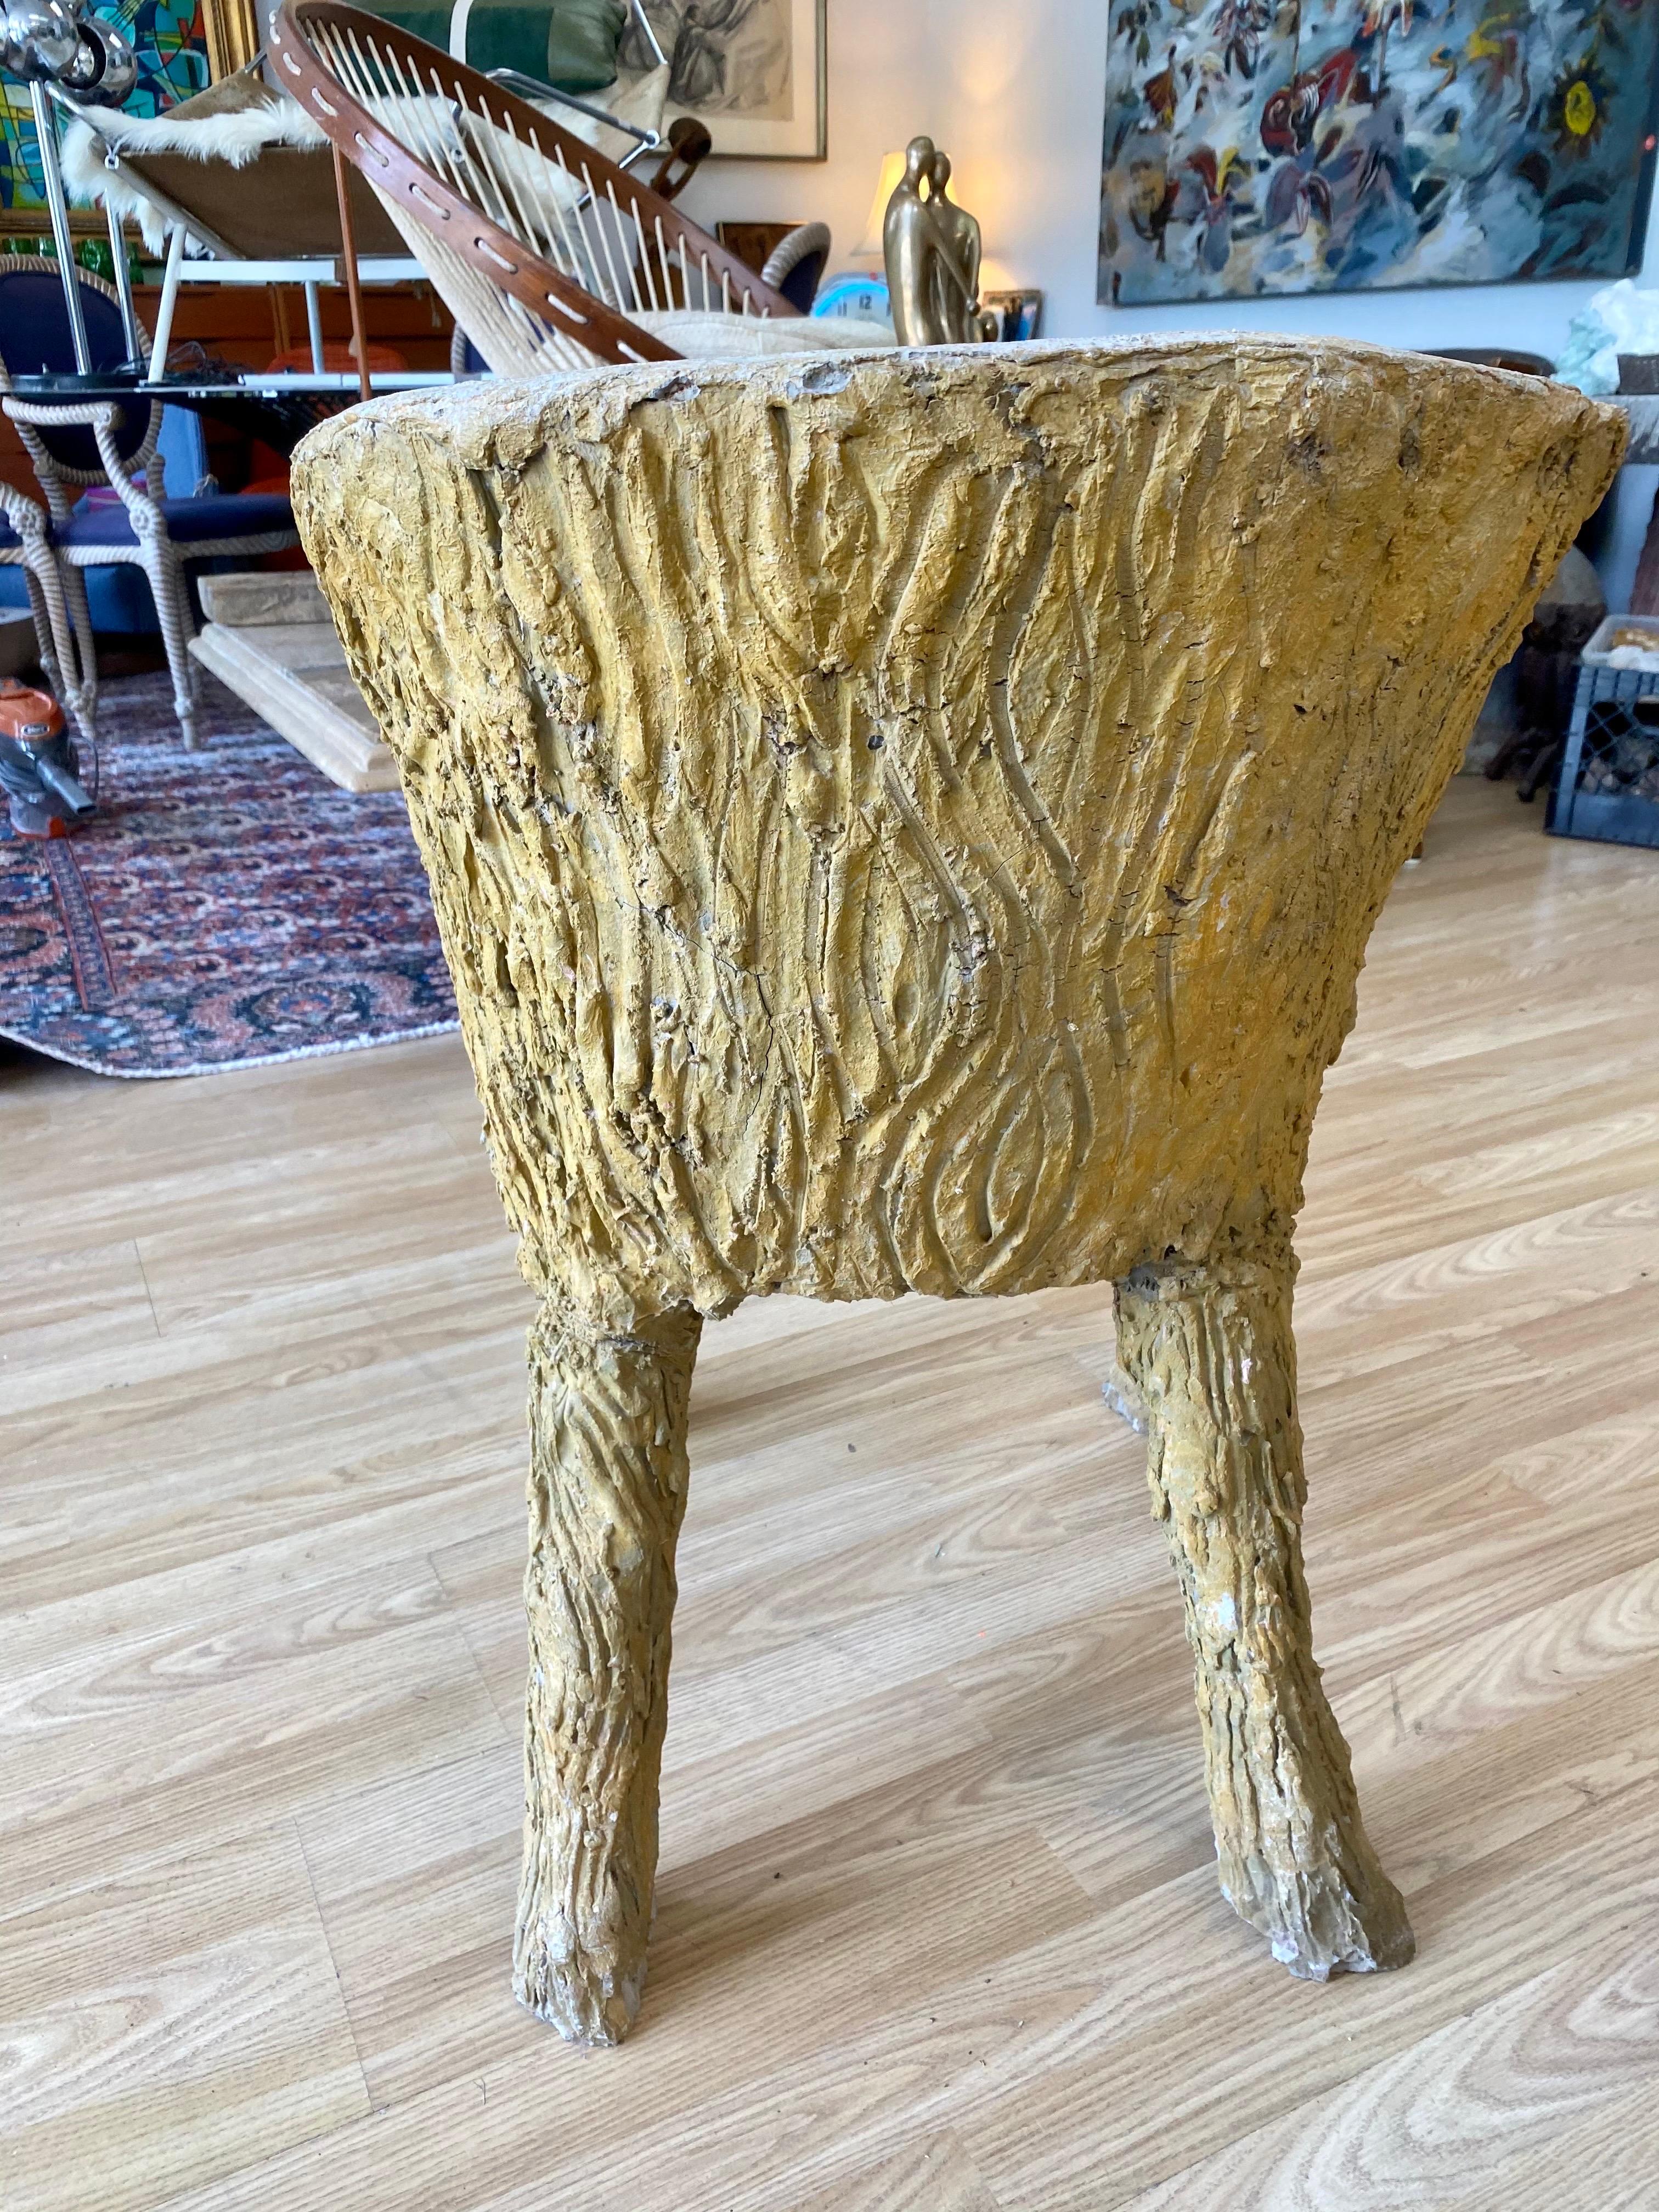 Beautiful faux bois chair. Made of concrete, faux bois refers to the artistic imitation of wood and wood grain.